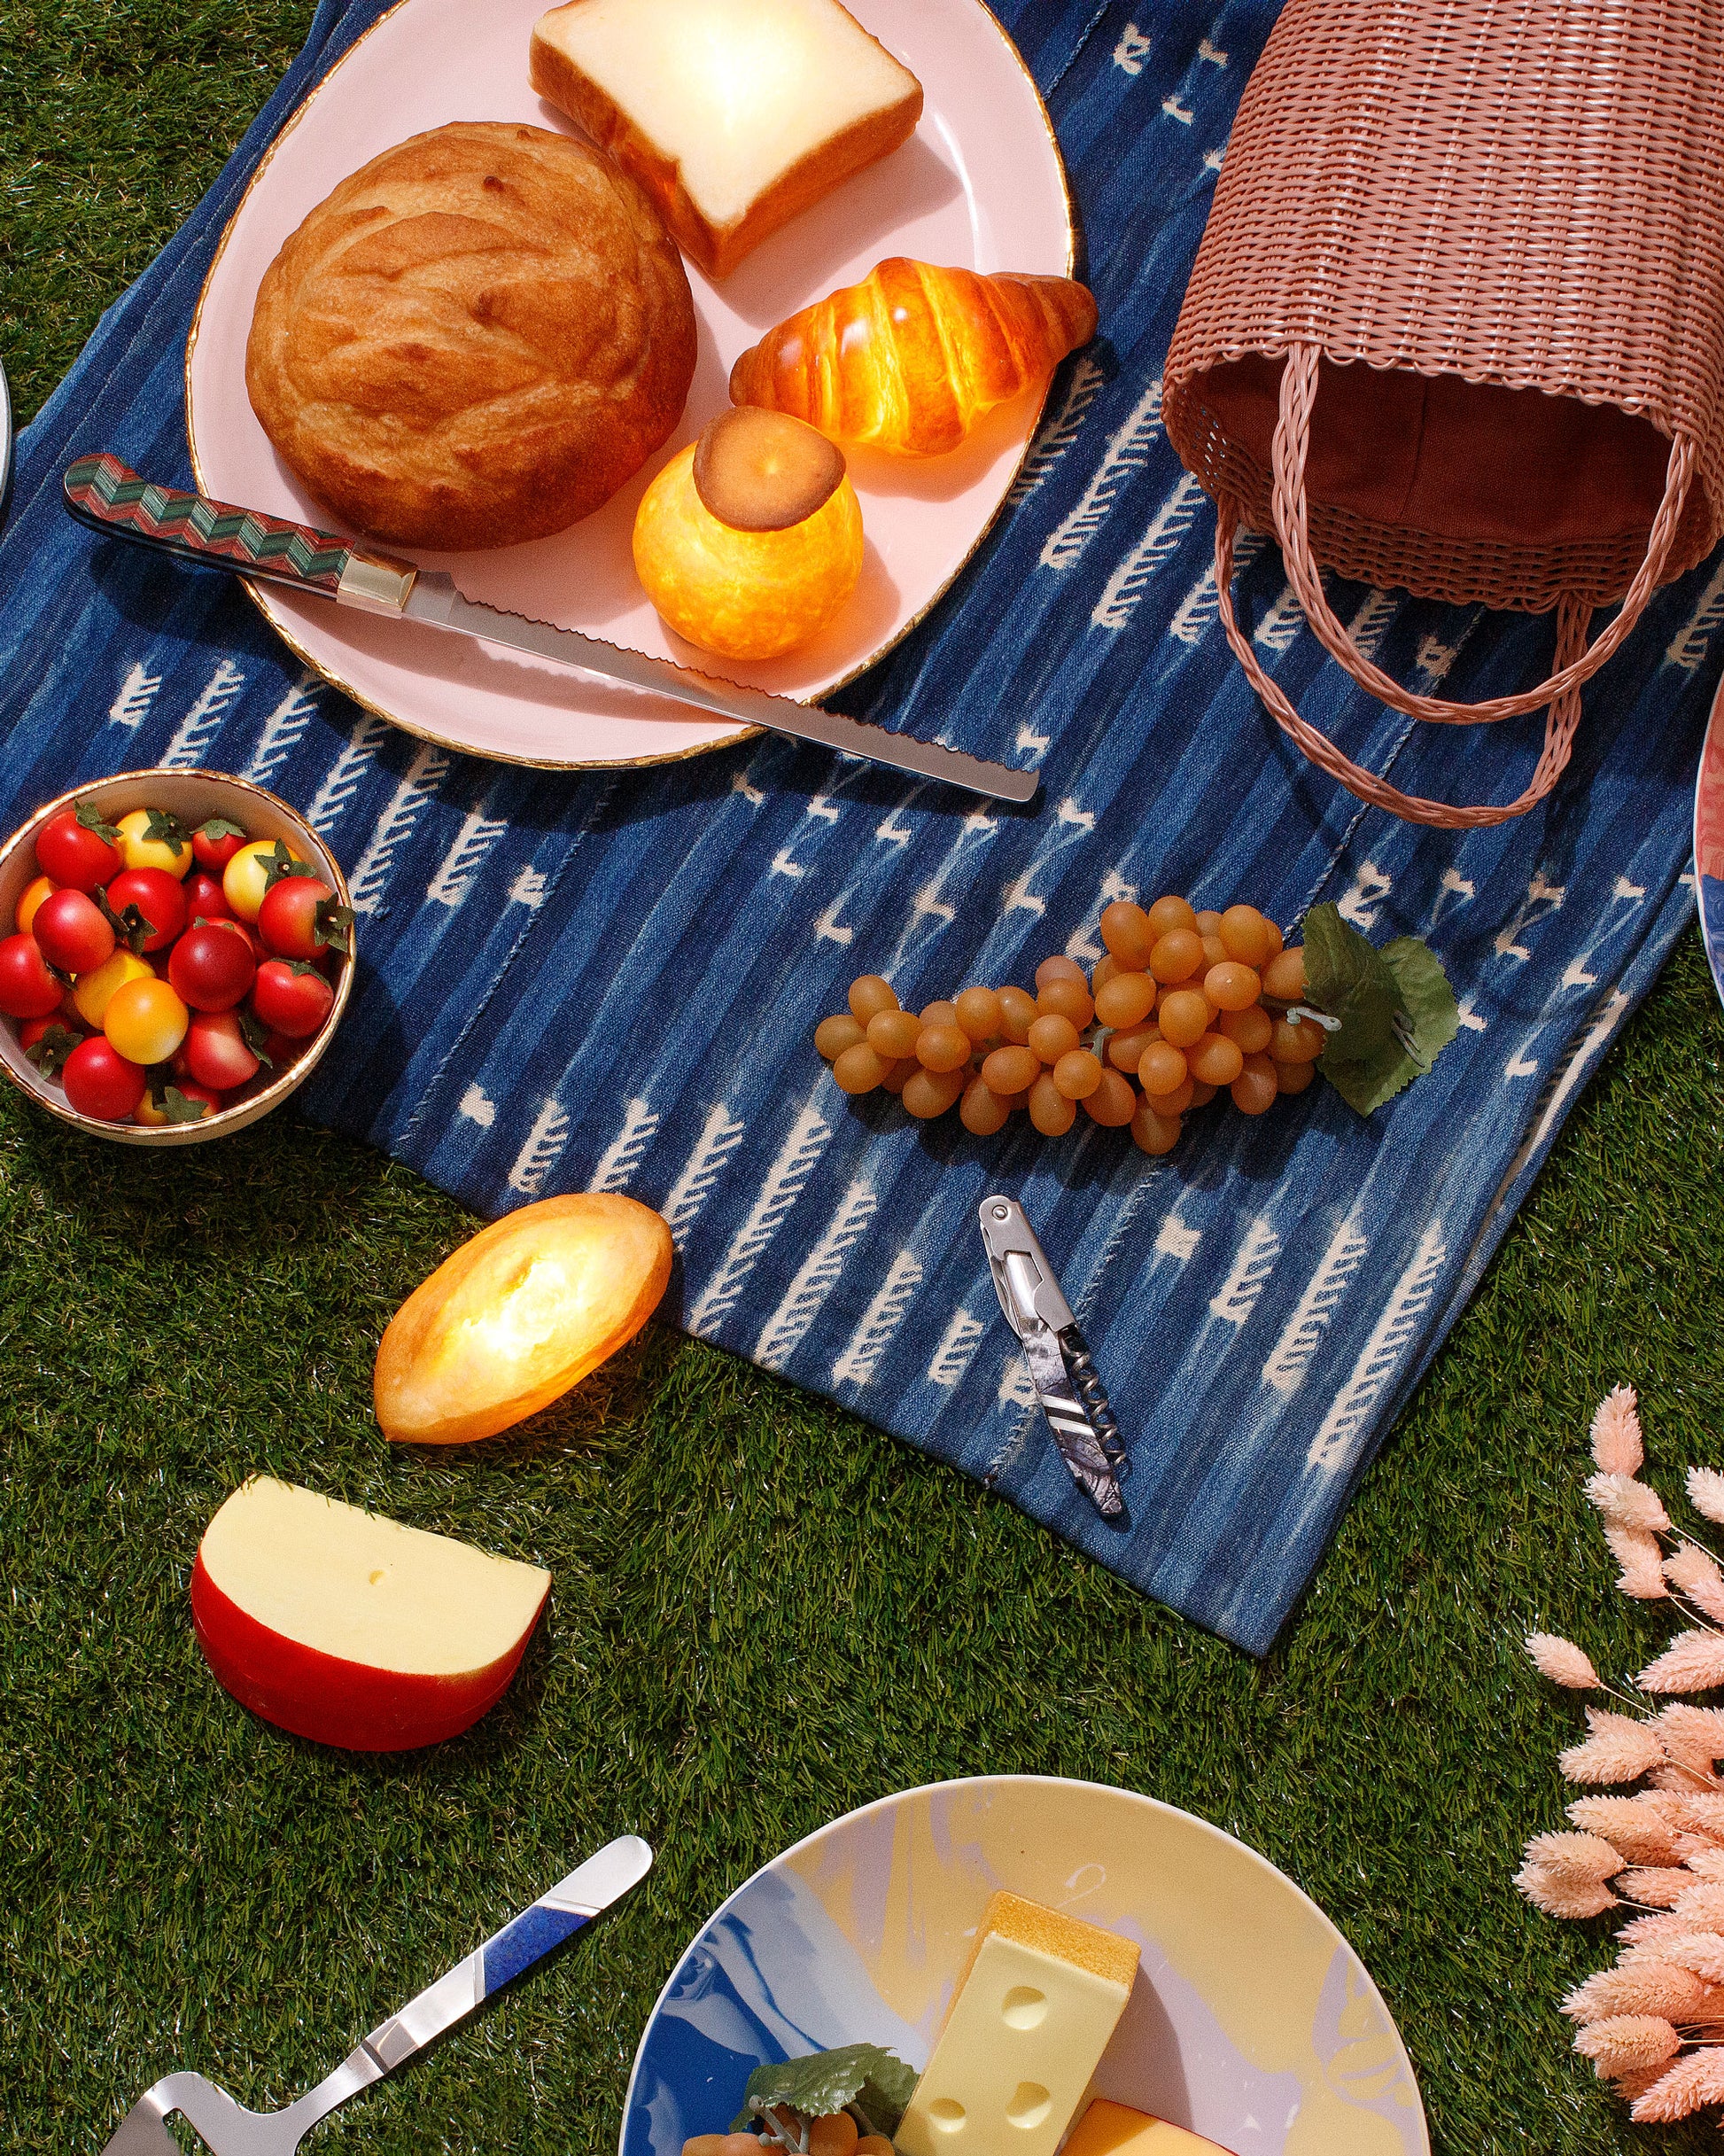 Styled Image featuring Pampshade Toast, Croissant, Chamignon, Boule and Petit Boule Lamps, with Santa Fe Stoneworks Bread Knife, Cheese Slicer and Waiter's Knife, with a Palorosa Tote Bag Basket.